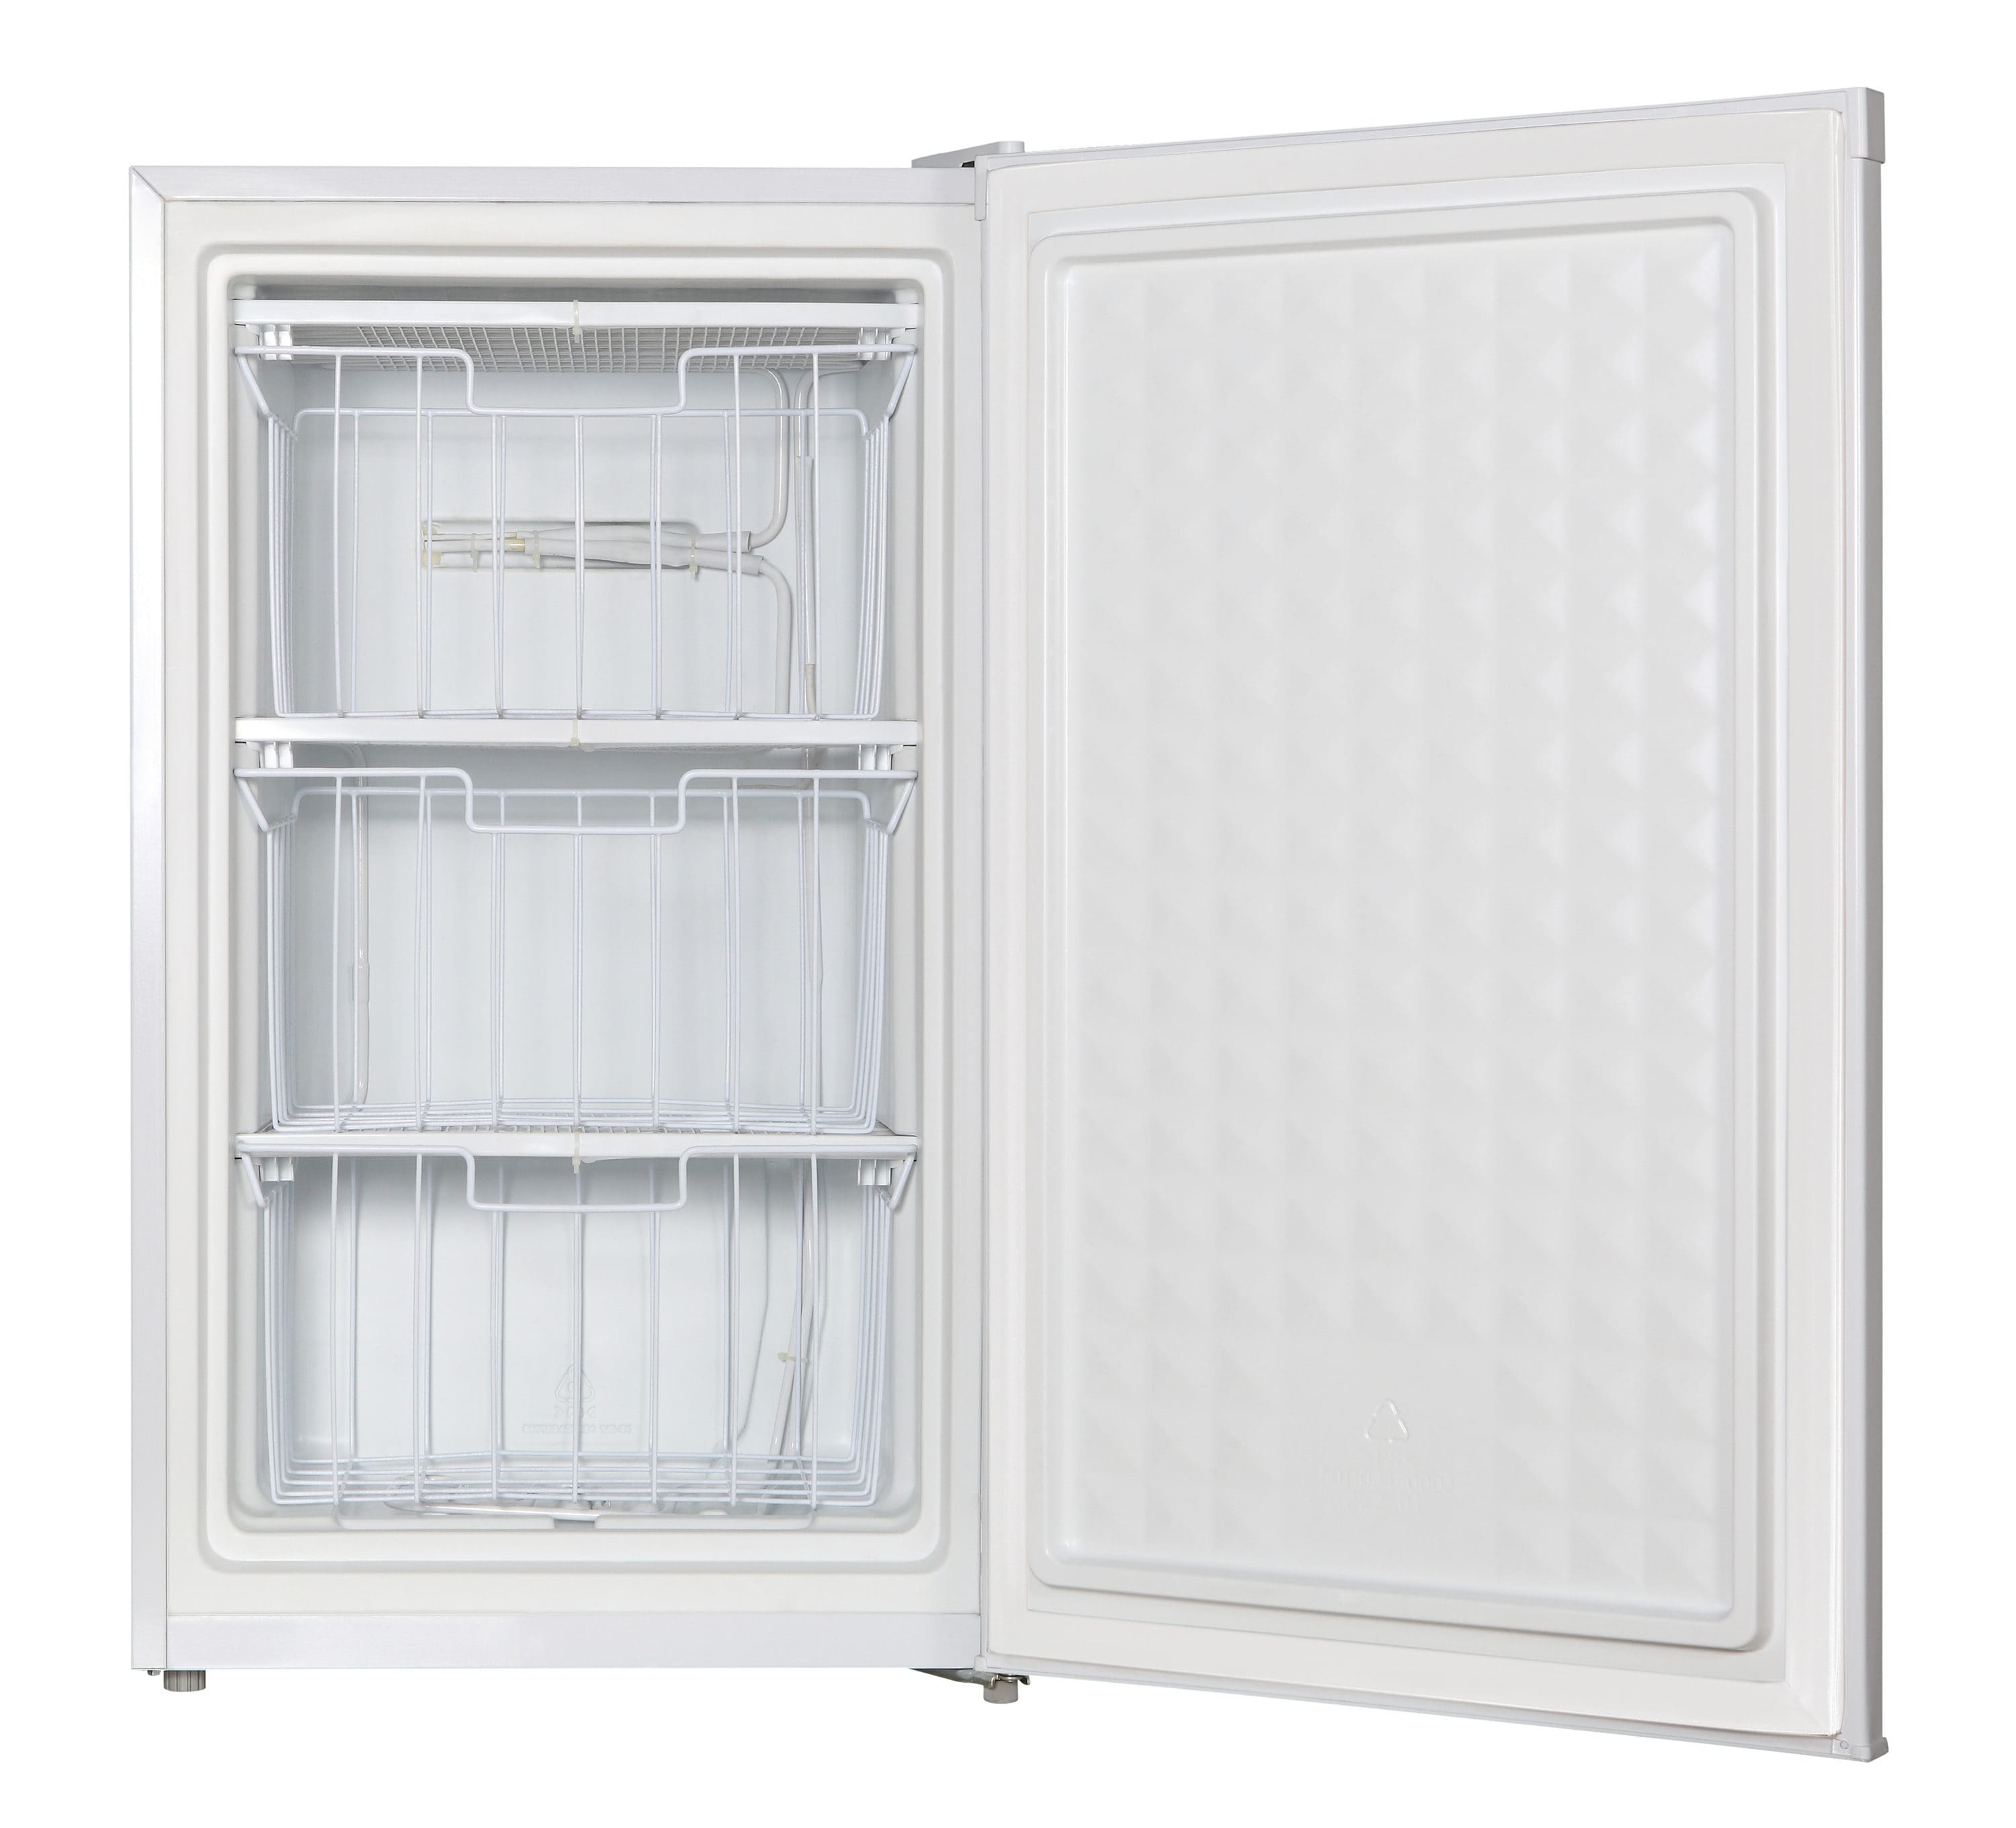 3.0 Cu.ft Compact Upright Freezer with Reversible Single Door - On Sale -  Bed Bath & Beyond - 32911022